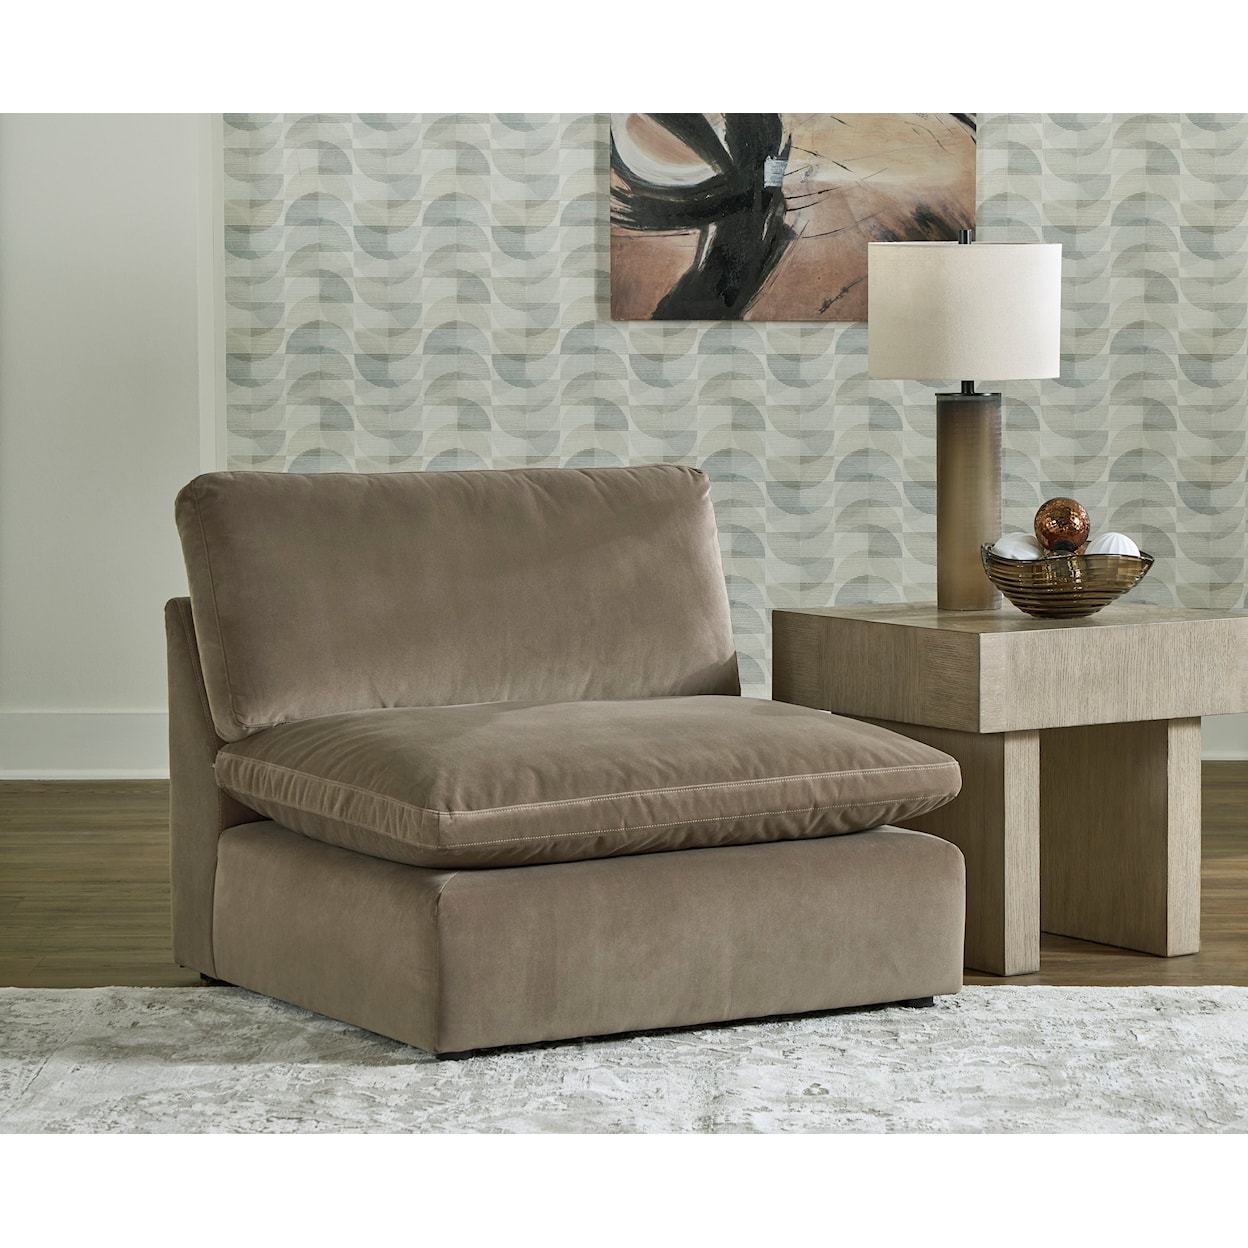 Signature Sophie Armless Chair